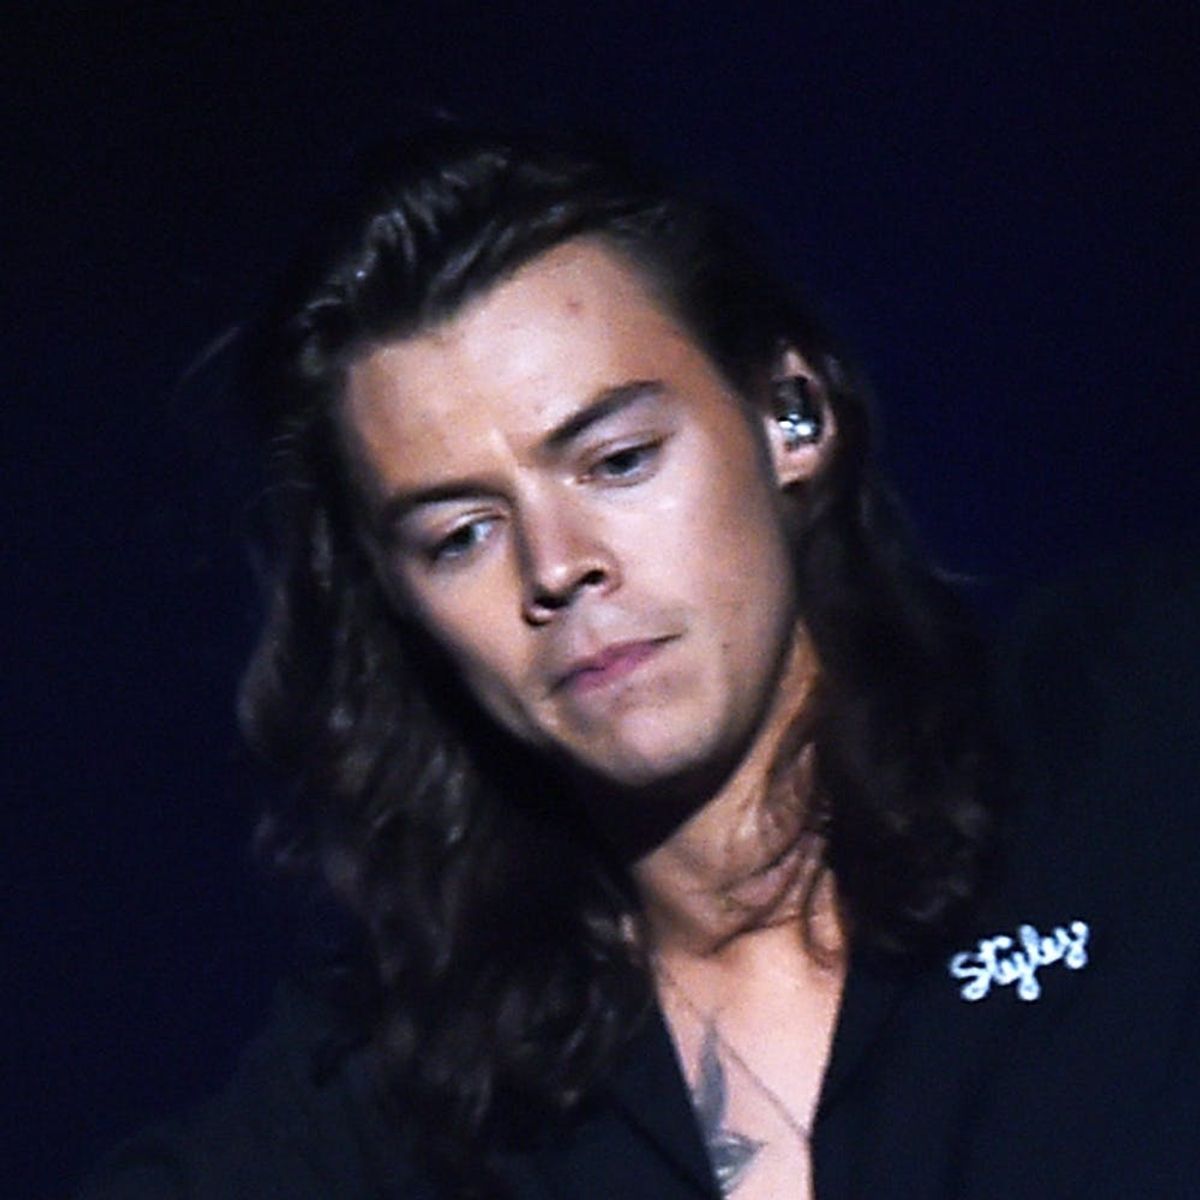 Harry Styles’ New Album May Get Him into HUGE Legal Trouble